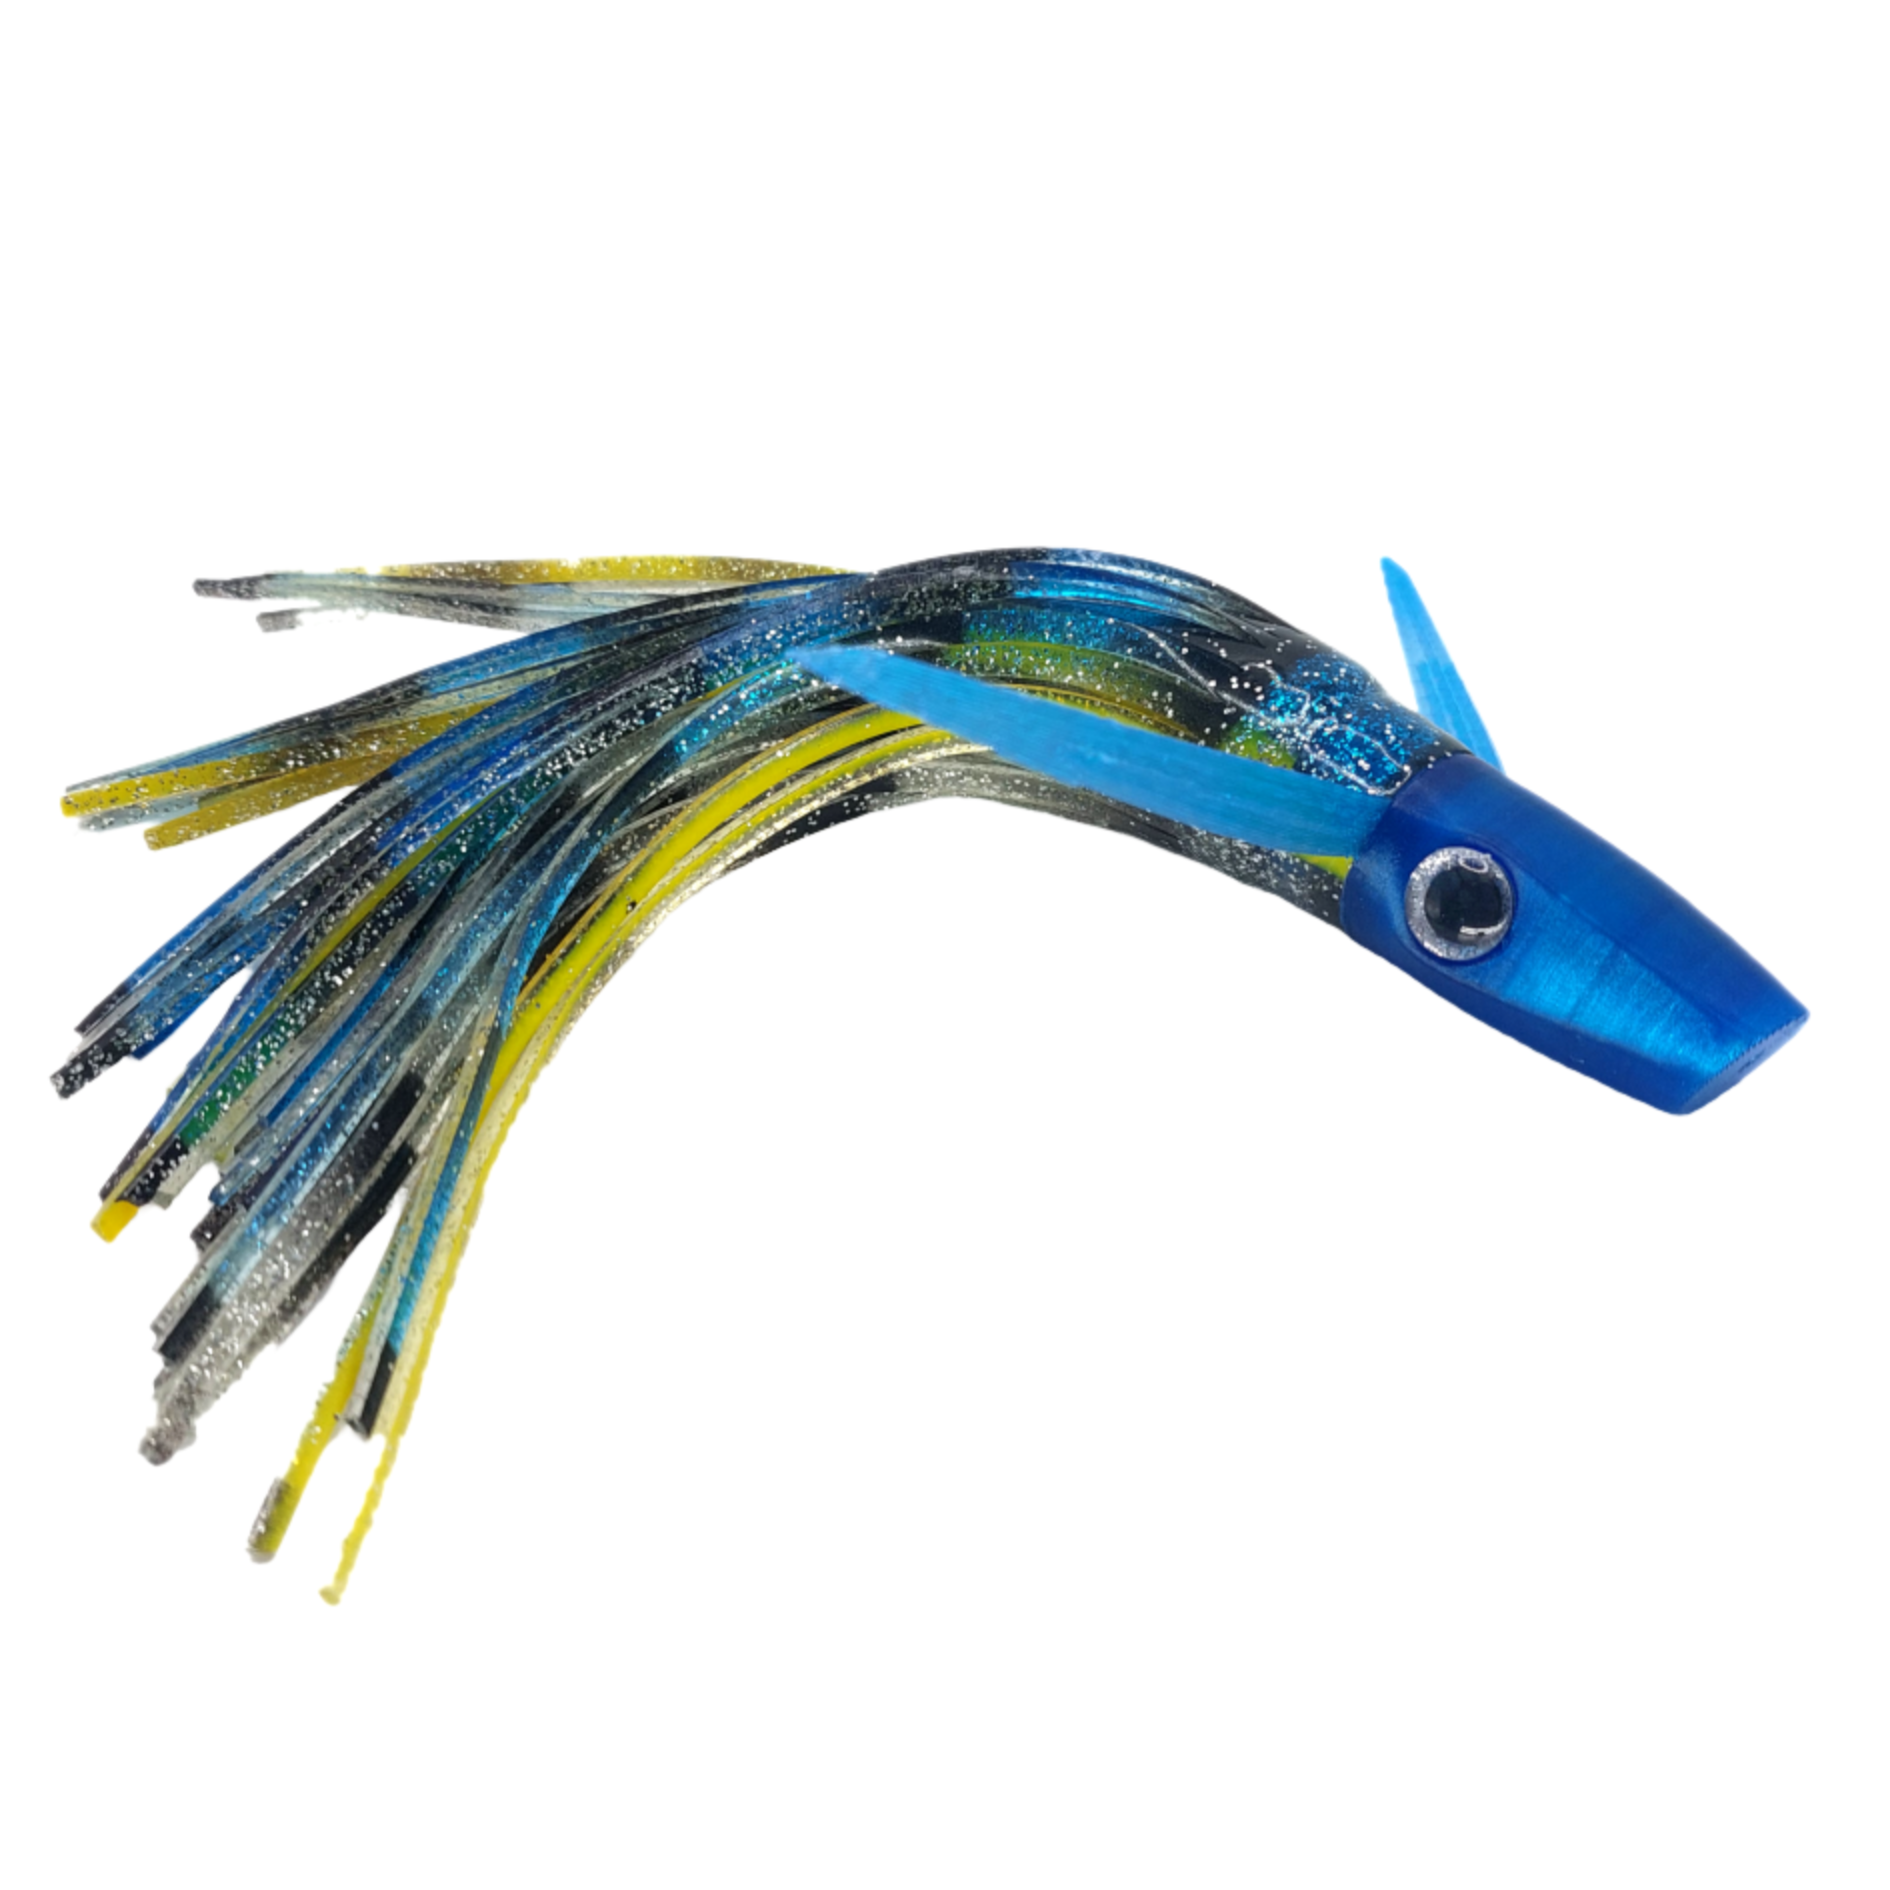 BigPlunge S3 9 Offshore Trolling Lure